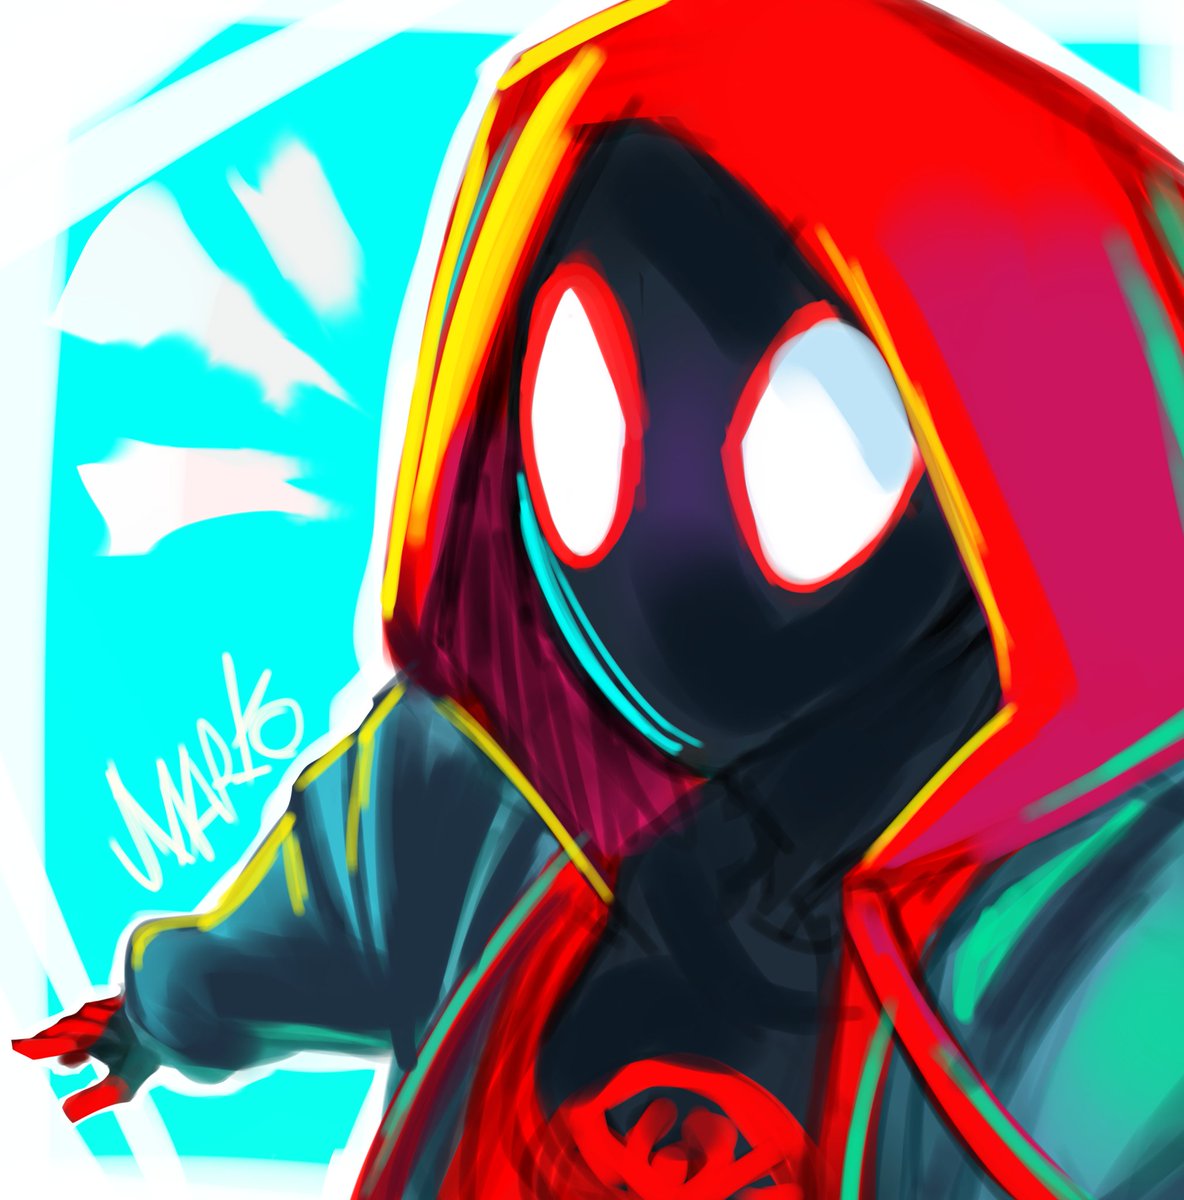 ▪︎``Miles - Morales, I was trying out a different art style  

#SpiderMan #MilesMorales #Art #Fanart #Marvel